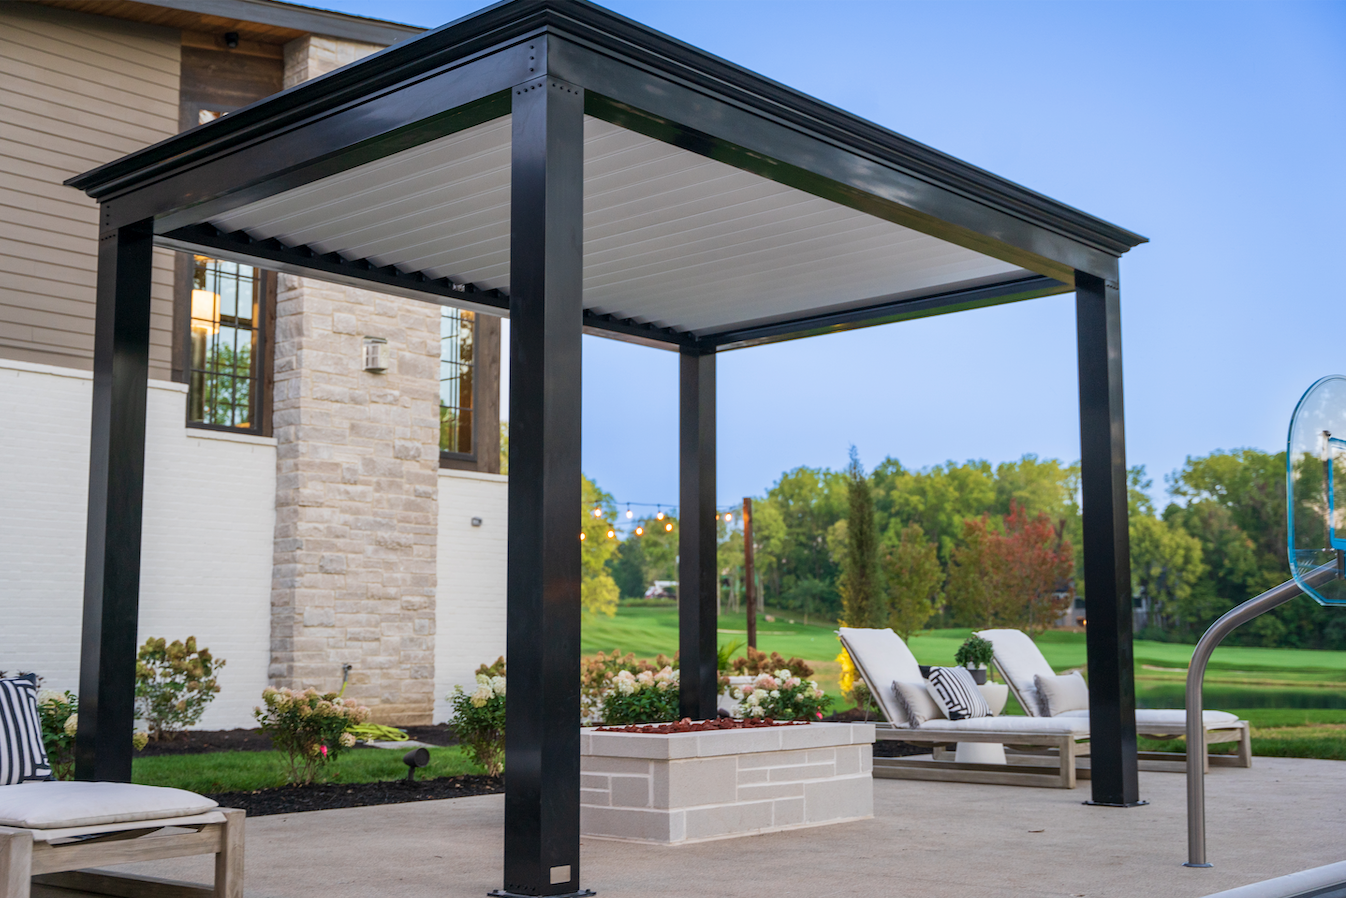 Louvered Pergola Kits: The Best DIY Kit for Your Outdoor Space